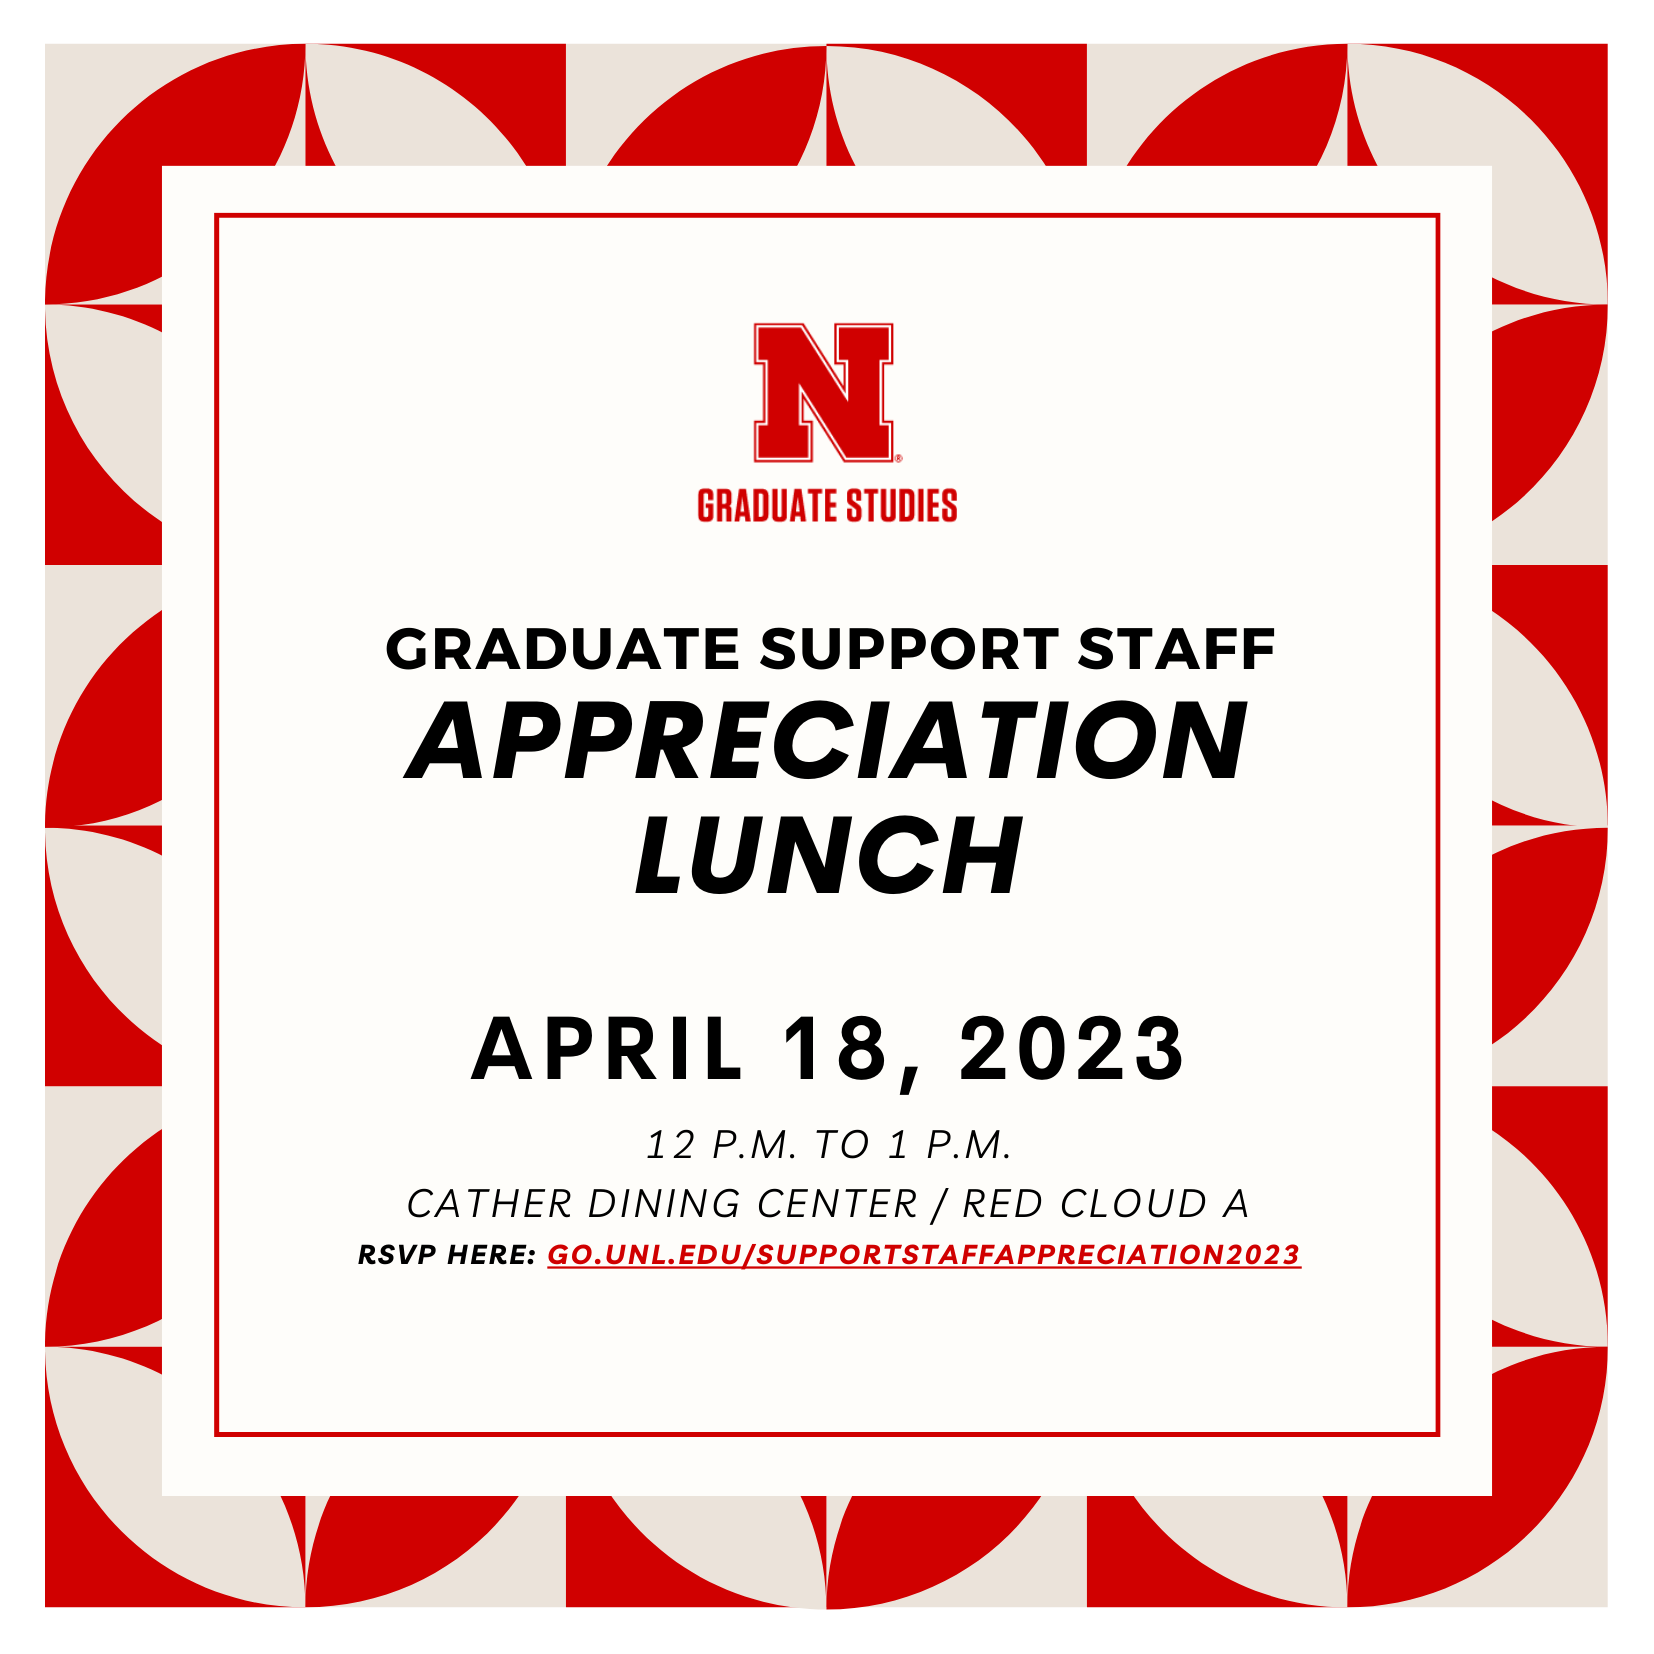 All members of the graduate community are encouraged to offer appreciation using an online form.